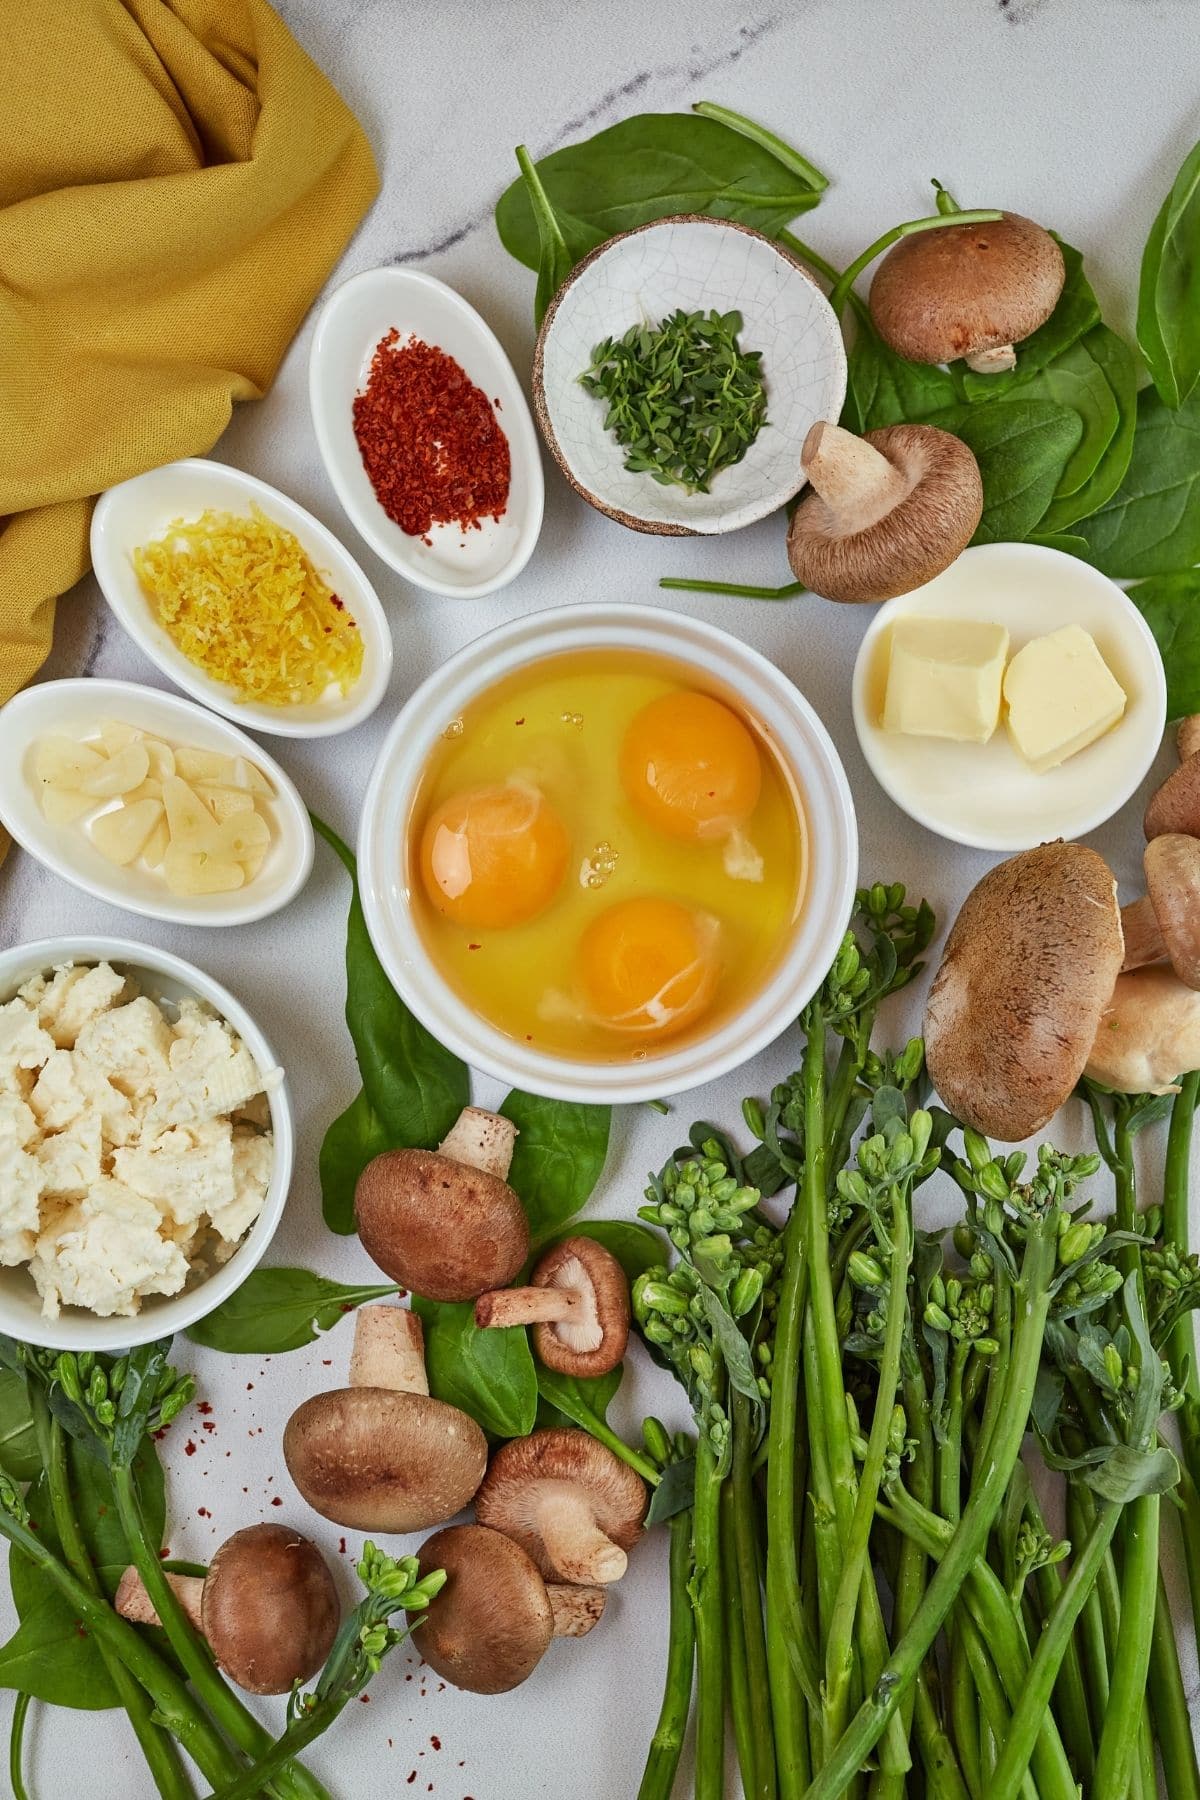 Ingredients for vegetable frittata